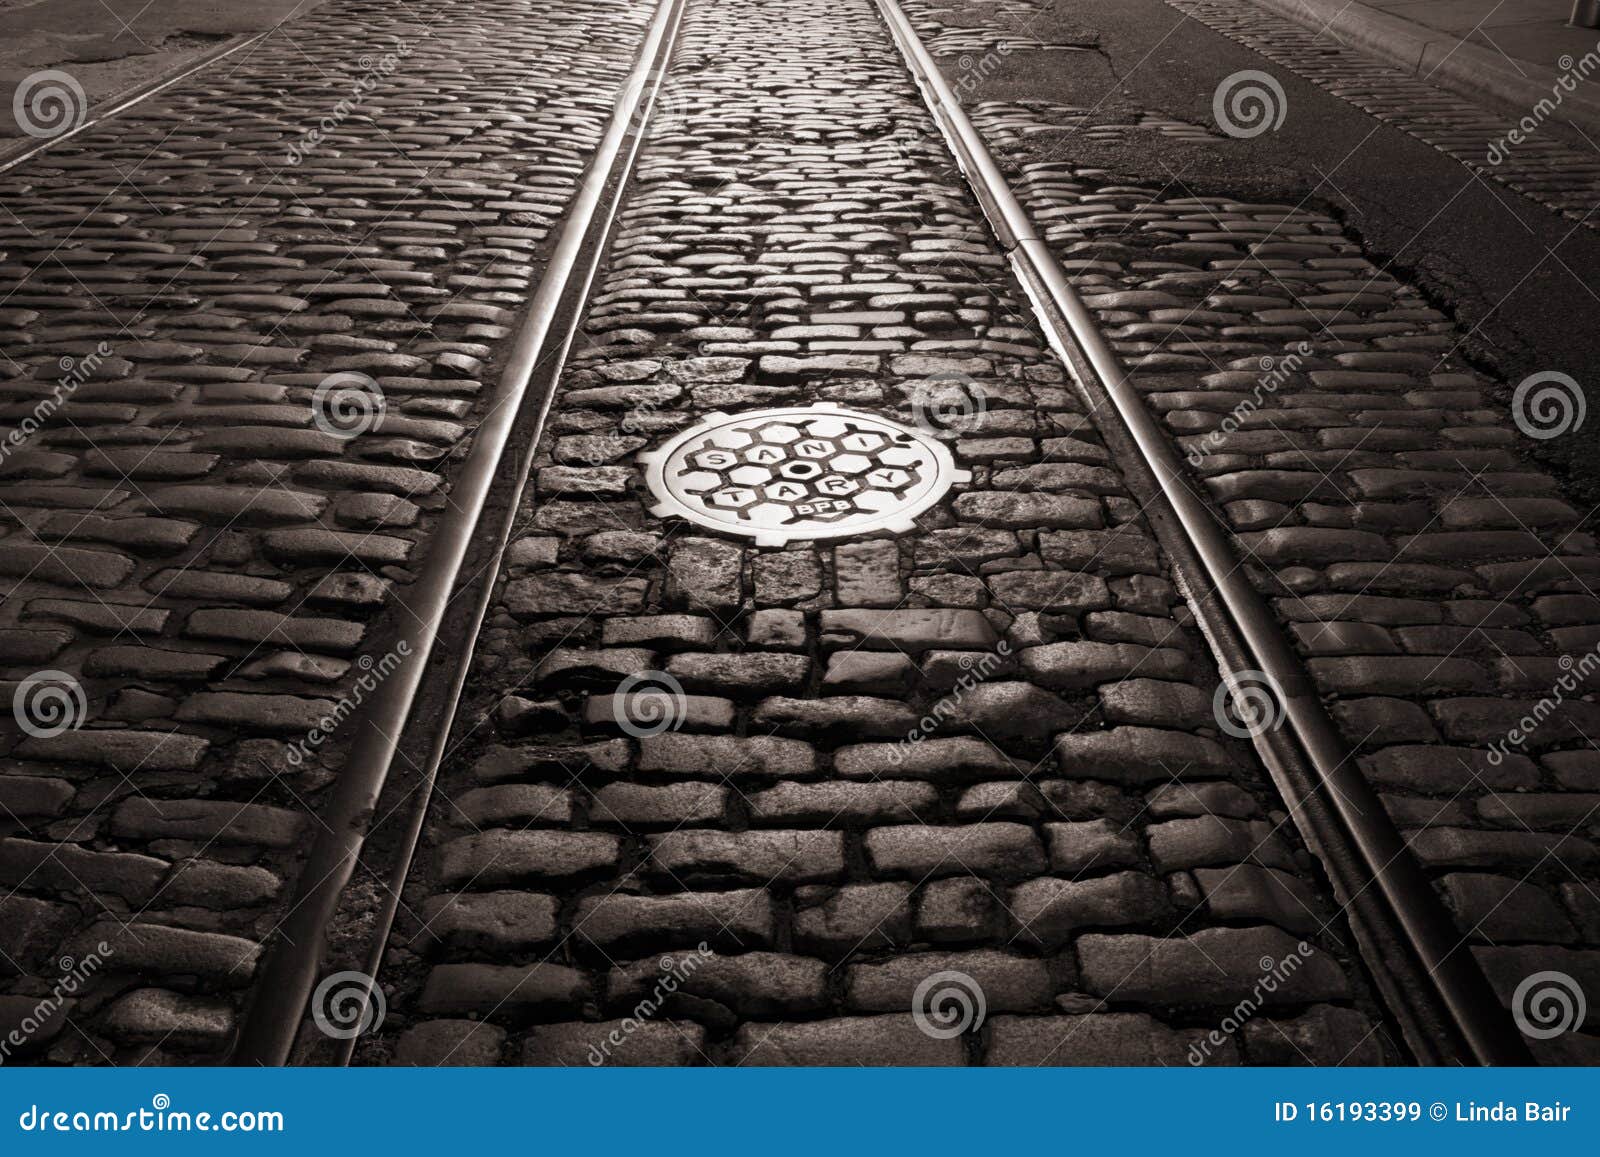 old trolley tracks and cobblestones